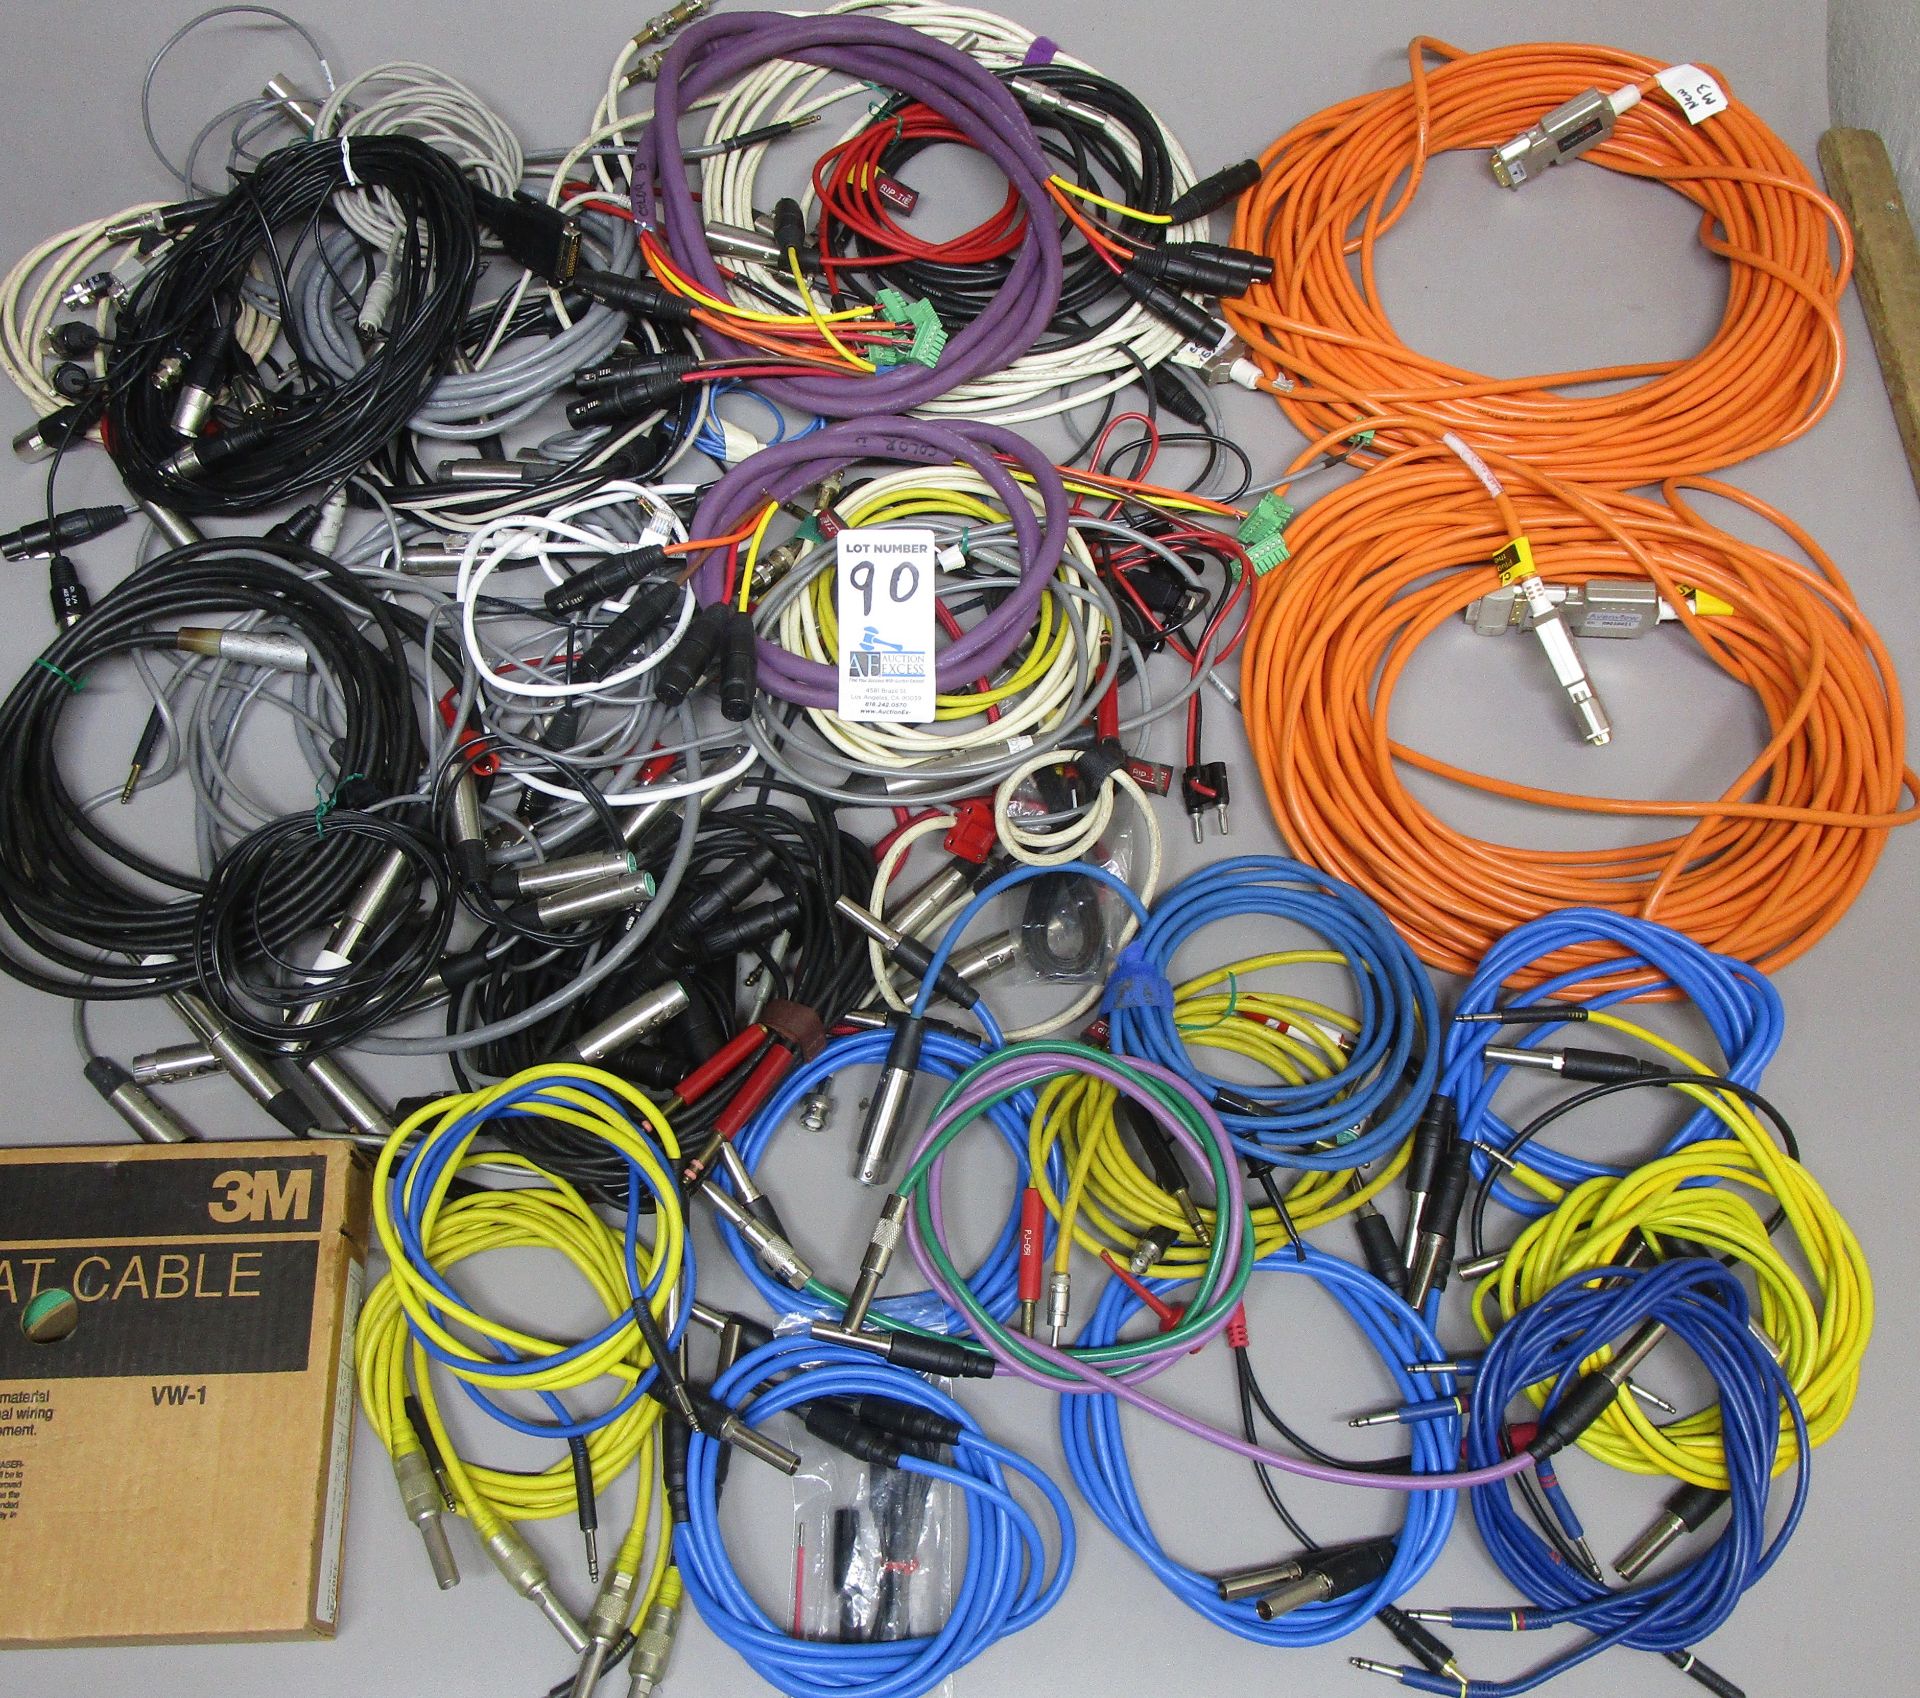 BOX AUDIO/VIDEO CABLES - Image 2 of 2